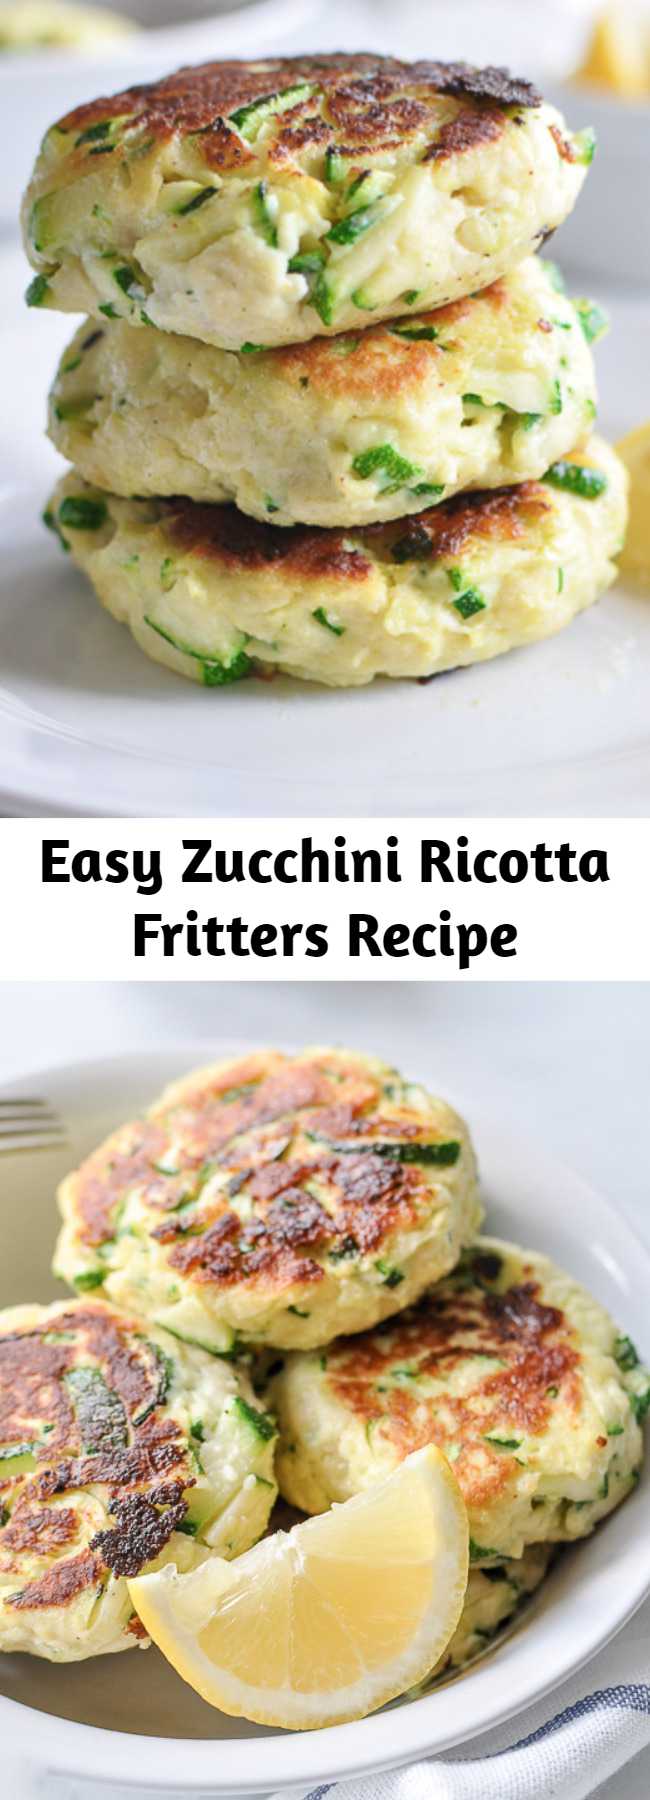 Easy Zucchini Ricotta Fritters Recipe - Seriously, this recipe is very easy. I find it more complicate to describe! After carefully dropping the cakes onto the sizzling pan and waiting a couple of minutes for each side to become firm and golden, it’s all about eating zucchini cakes with a melt in your mouth texture, creamy but not in the heavy way. I believe that along with a side, these fritters would be a perfect addition to a healthy quick lunch.